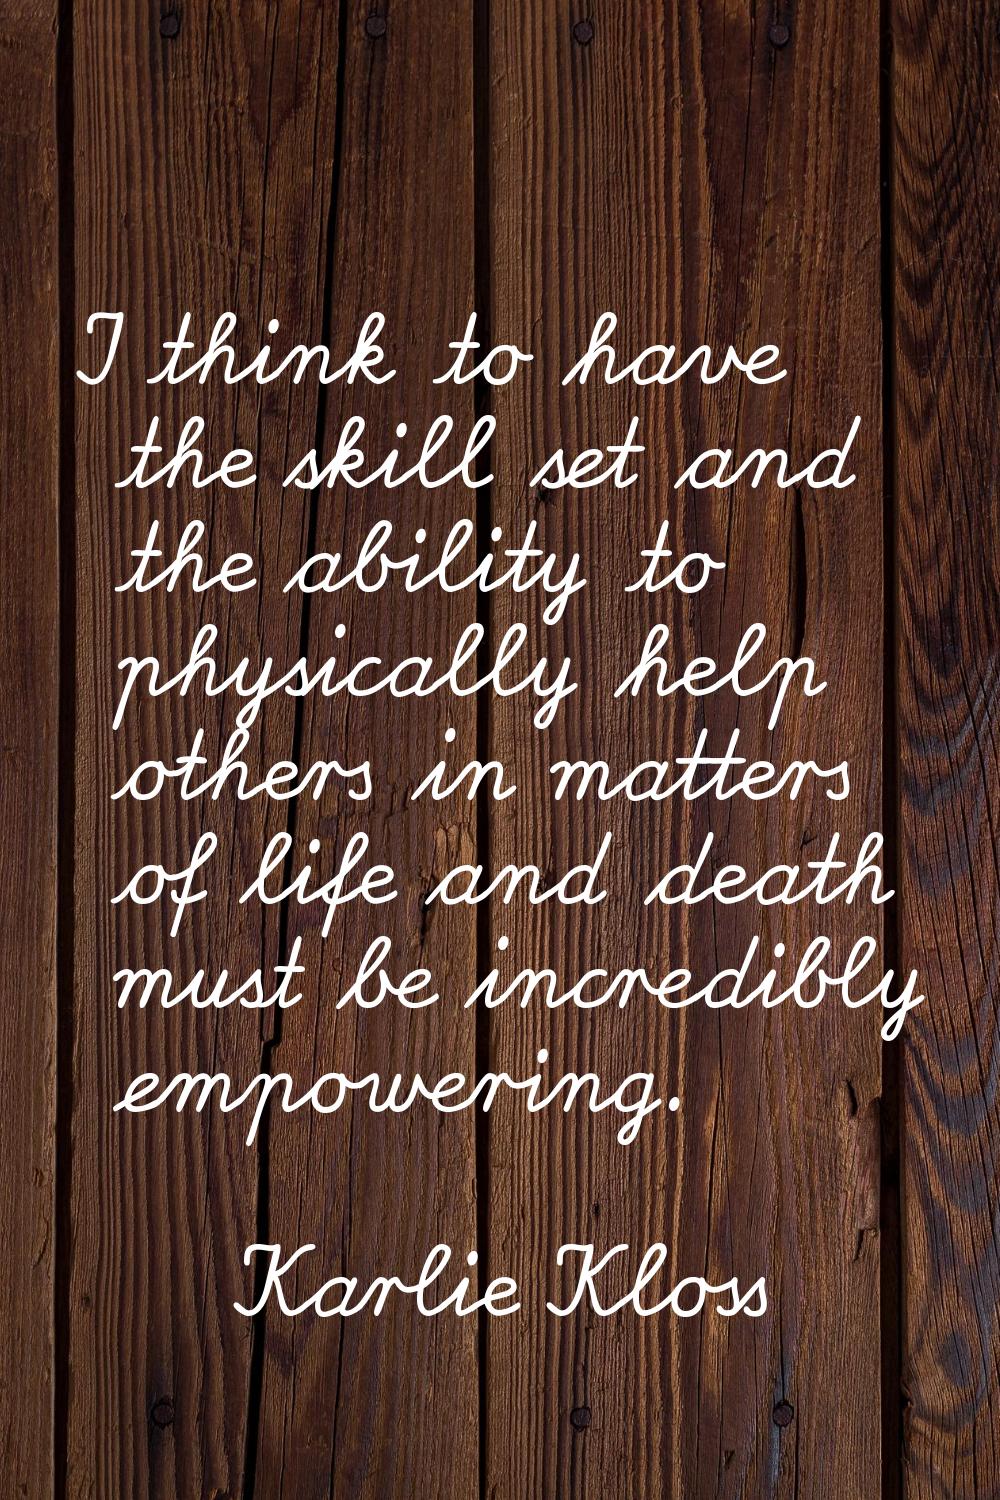 I think to have the skill set and the ability to physically help others in matters of life and deat